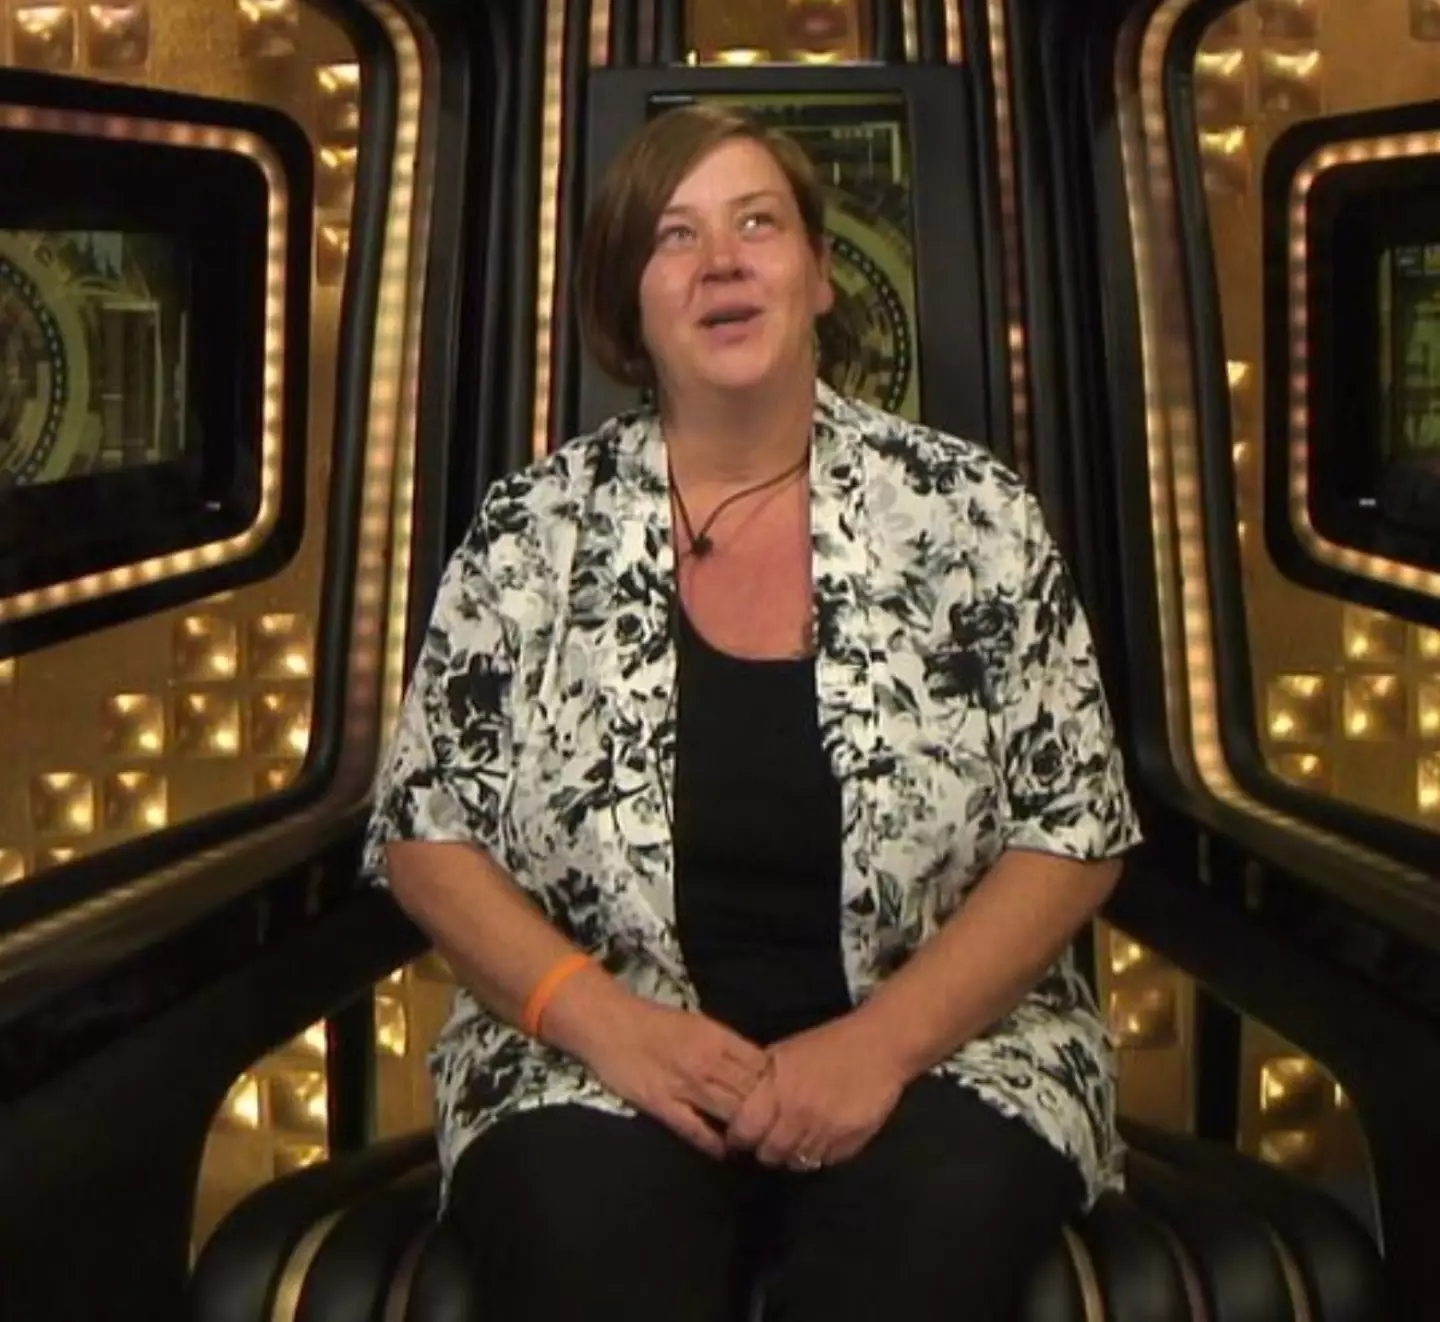 Kelly was a contestant on Celebrity Big Brother.